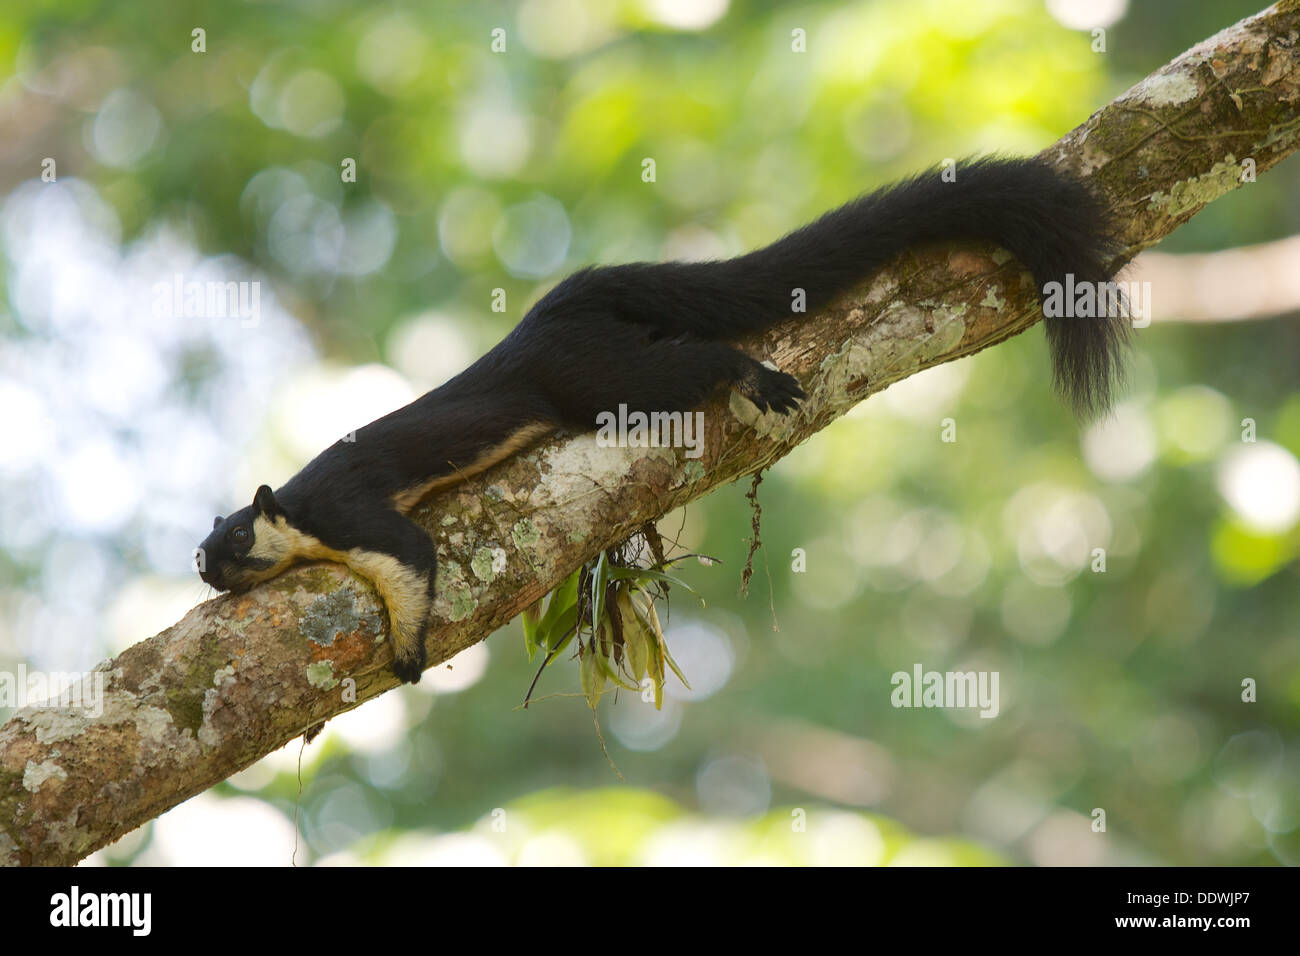 The black giant squirrel (or Malayan giant squirrel) (Ratufa bicolor) in Khao Yai National Park, Thailand. Stock Photo